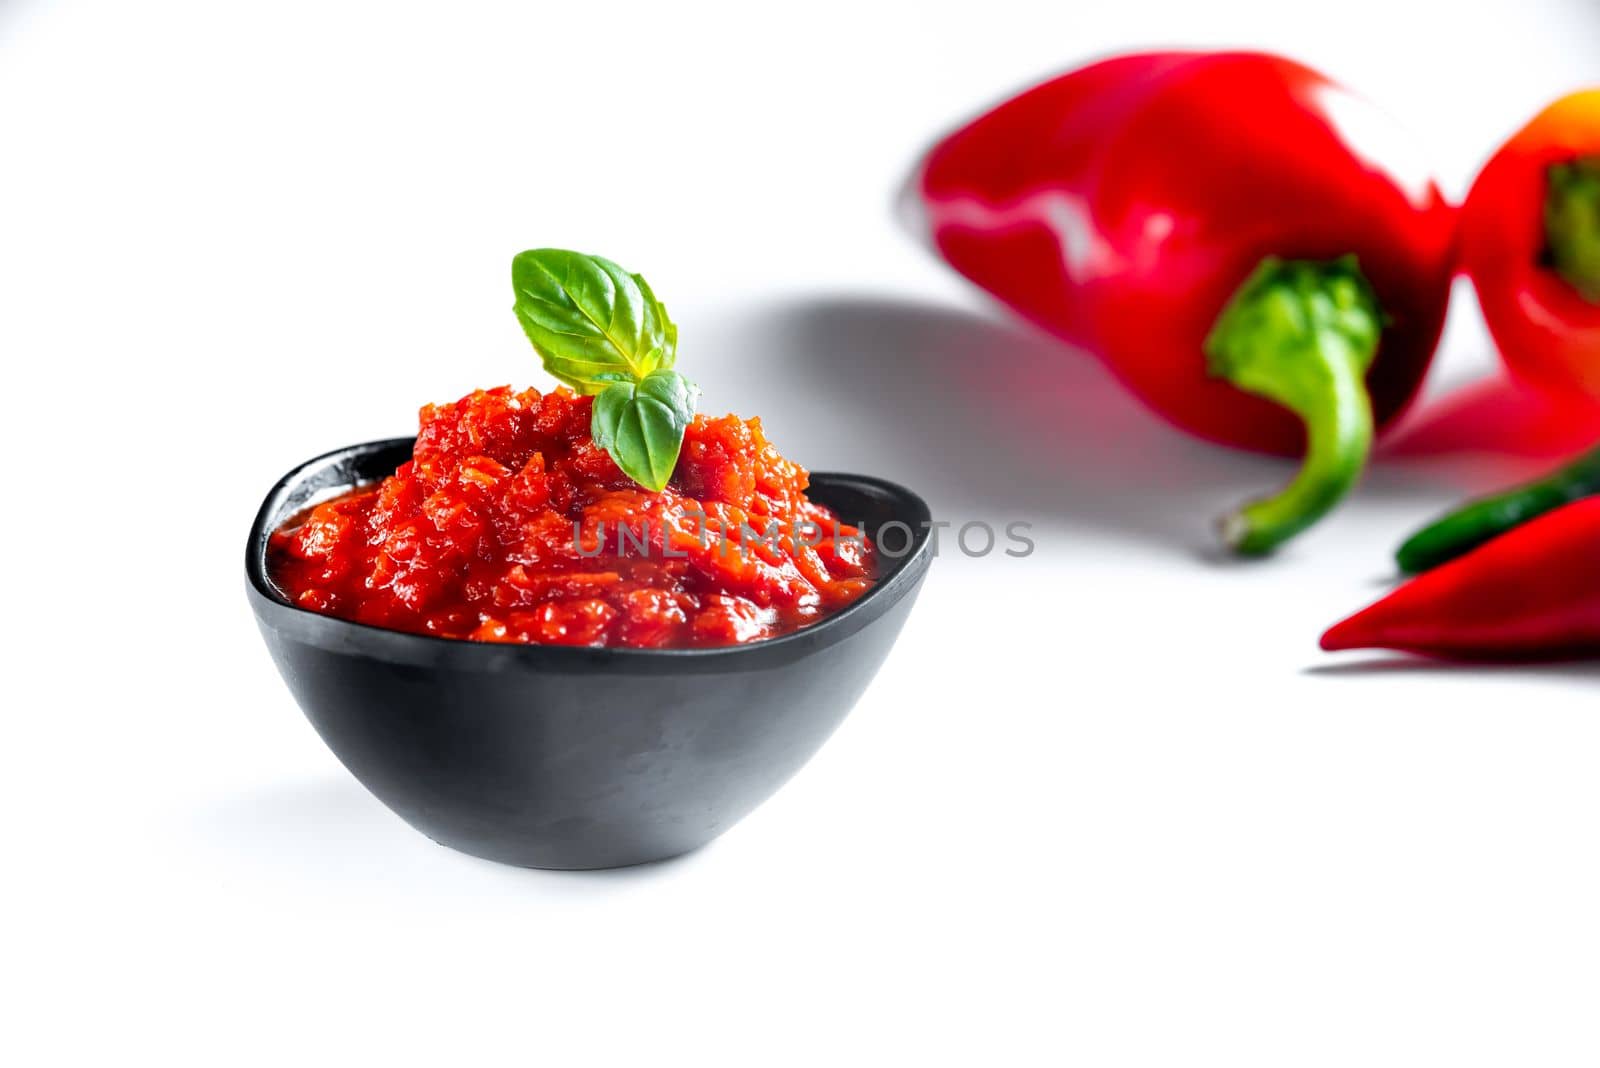 Red paste ajvar of red sweet peppers. on white background with ingredients for cooking. by gulyaevstudio